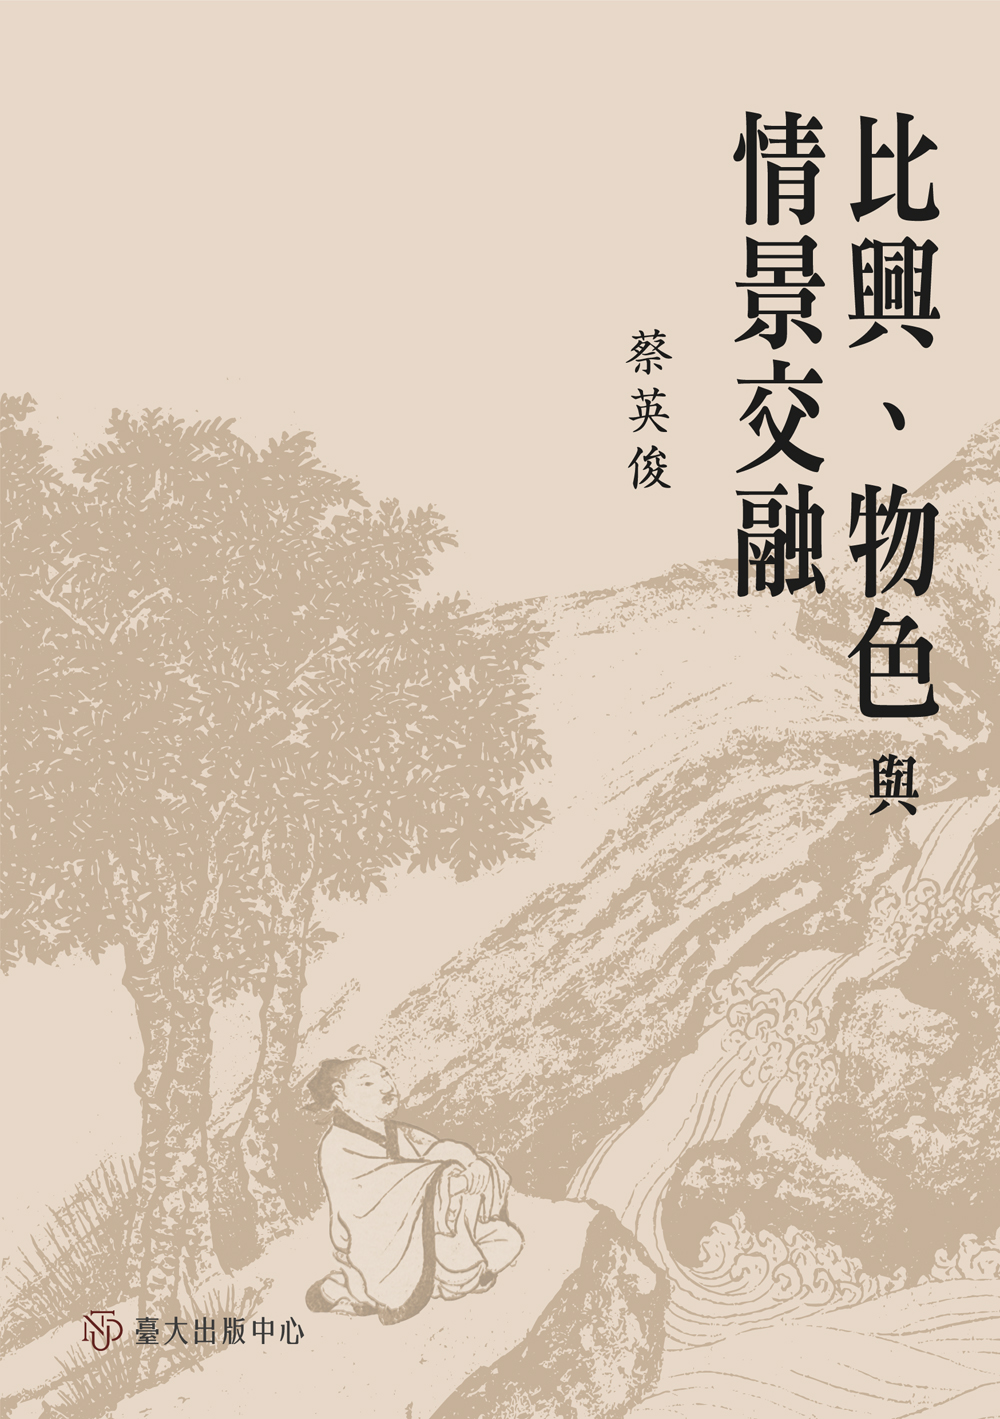 Bi-Xing, the Correlation of Inner Feeling and Outer Scene, and the Reading of Imagery in the Classical Chinese Poetry